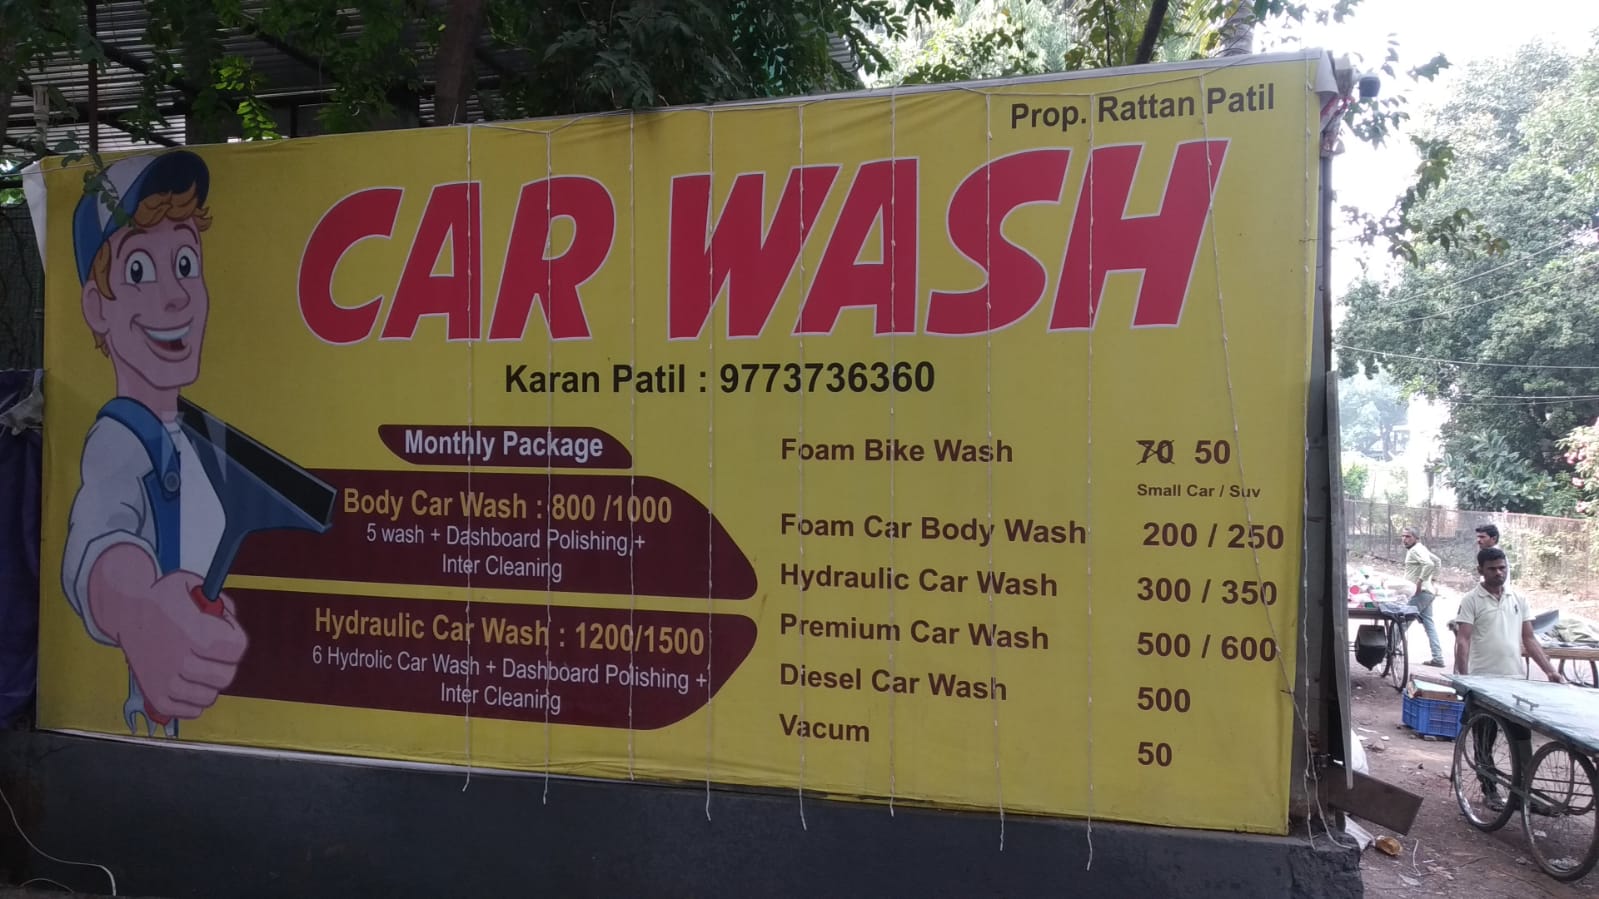 Book Car Wash With Car Wash Center in Pune at Affordable Price.